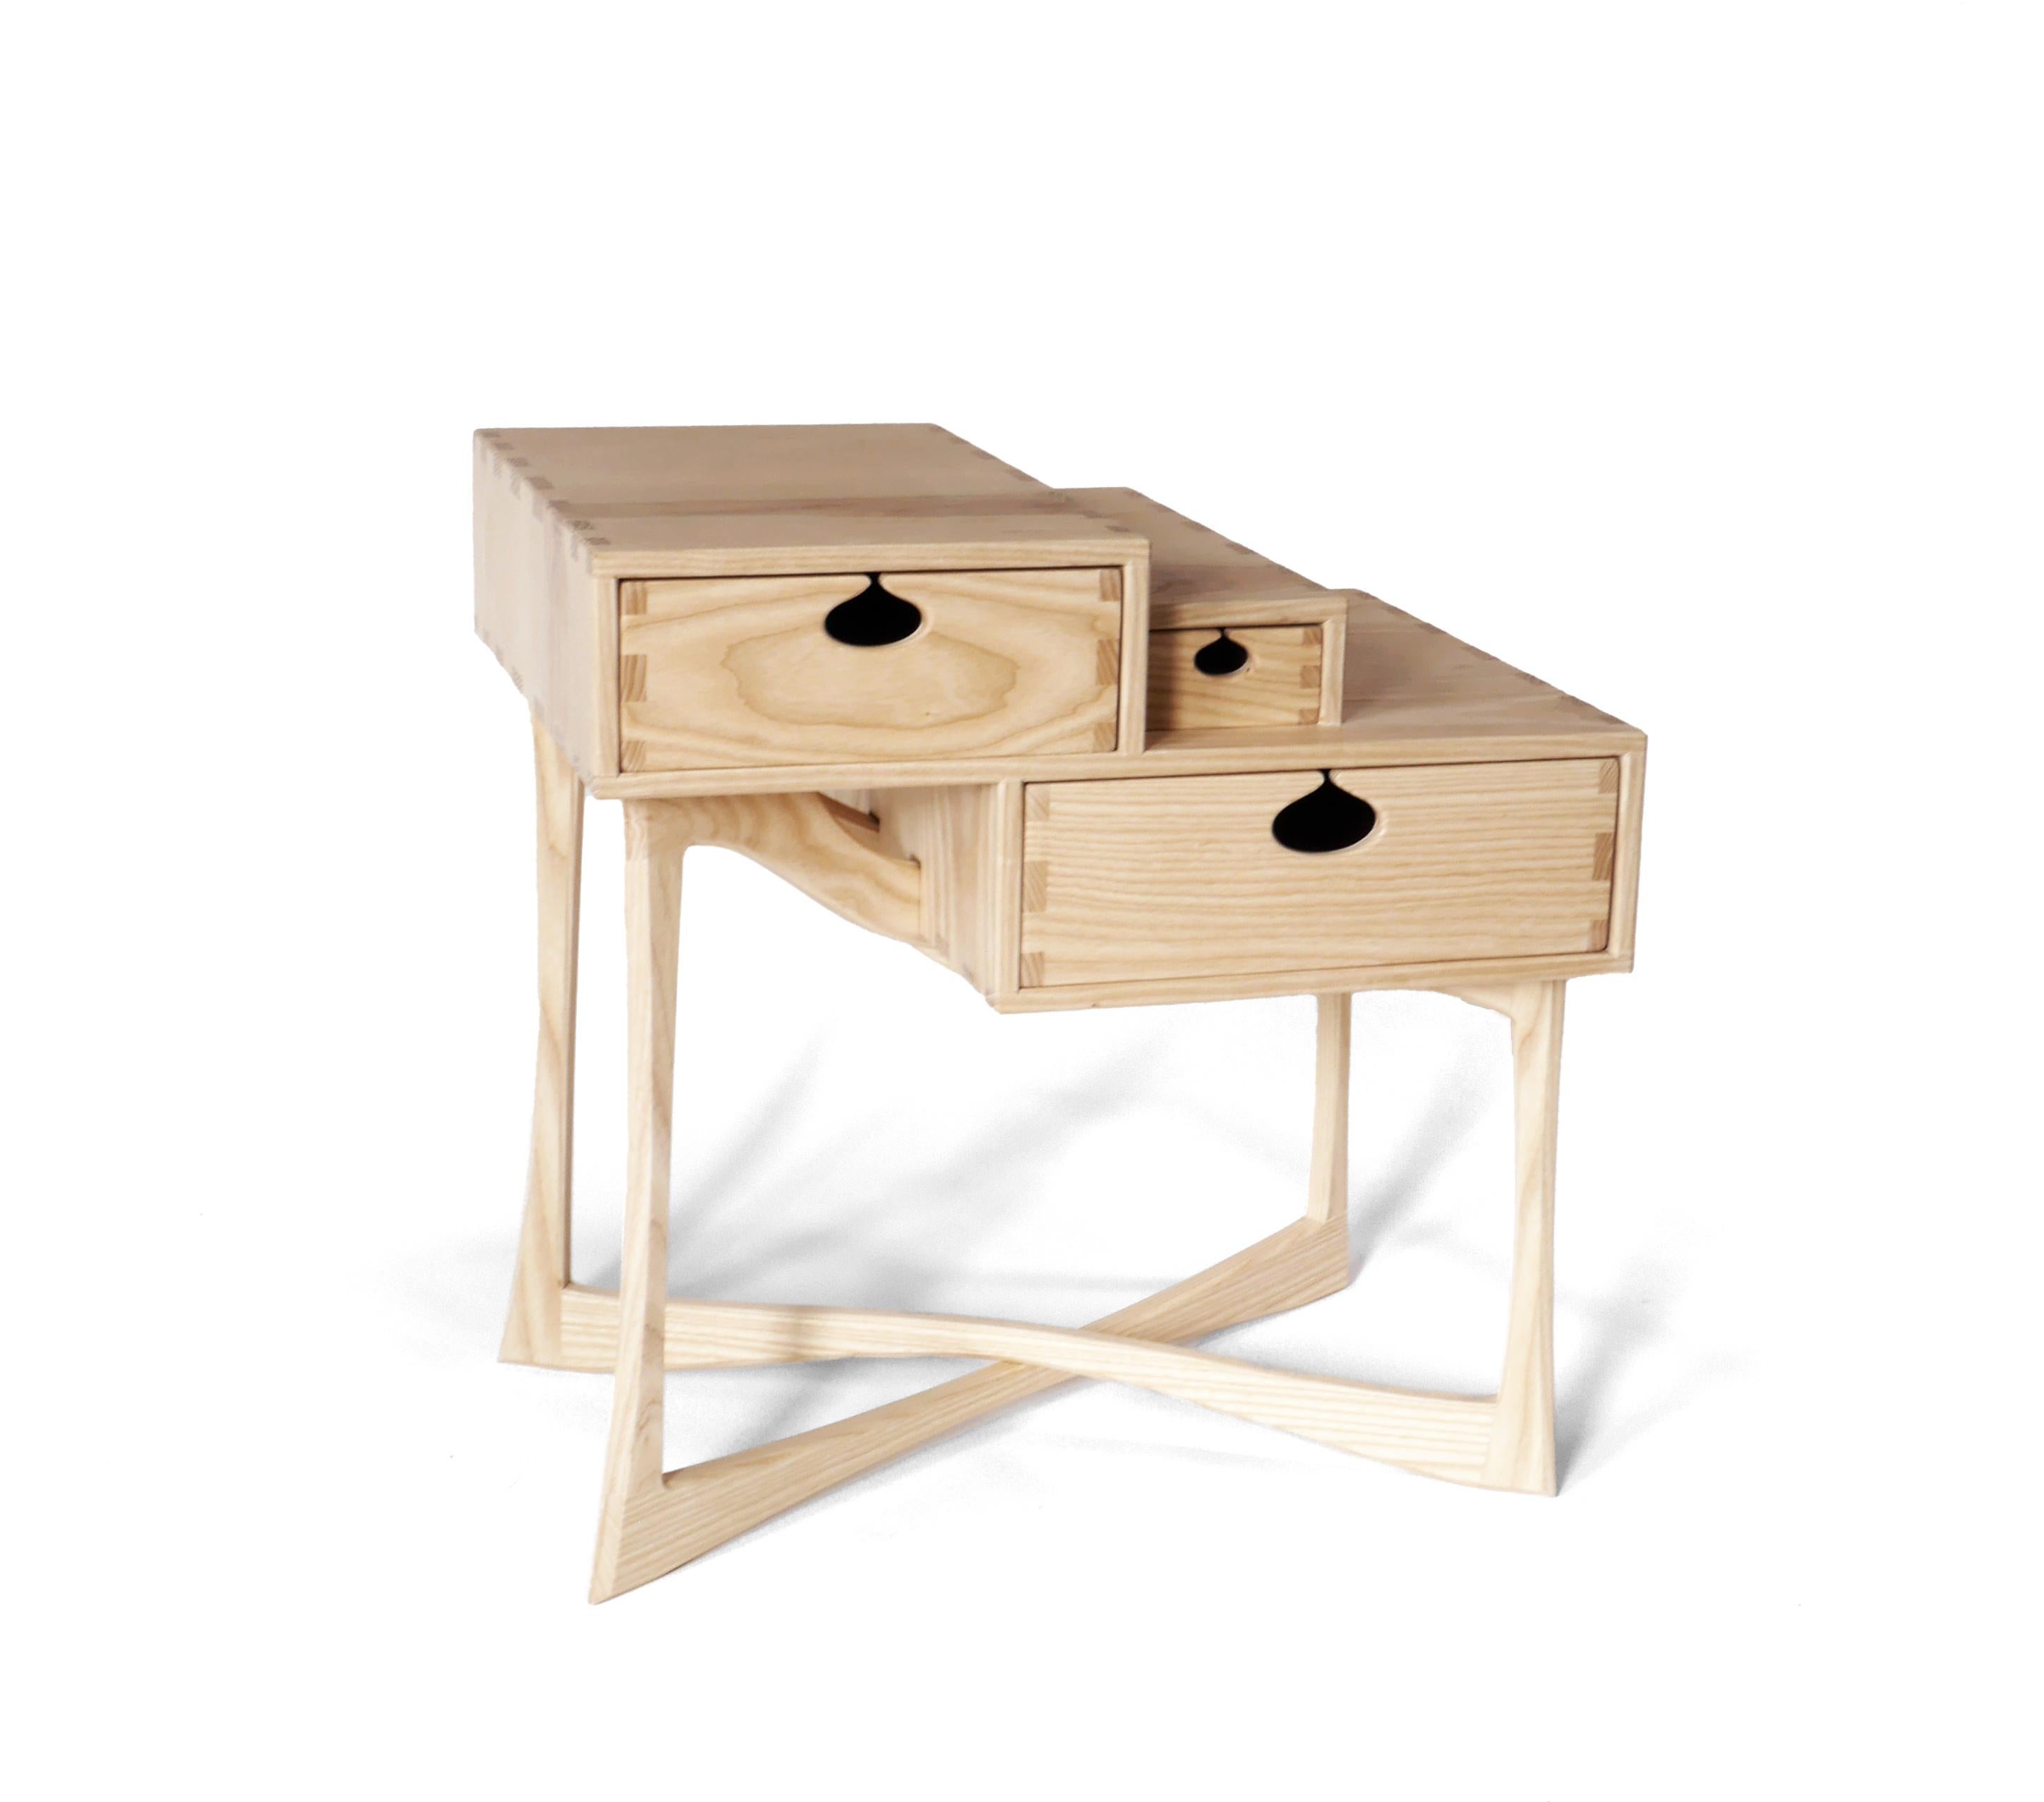 The charismatic Coriolis Side Table is made out of solid white ash hardwood and has three drawers mounted on wooden runners in traditional drawer boxes. It’s built with exposed joinery that has been carefully designed for beauty and strength.